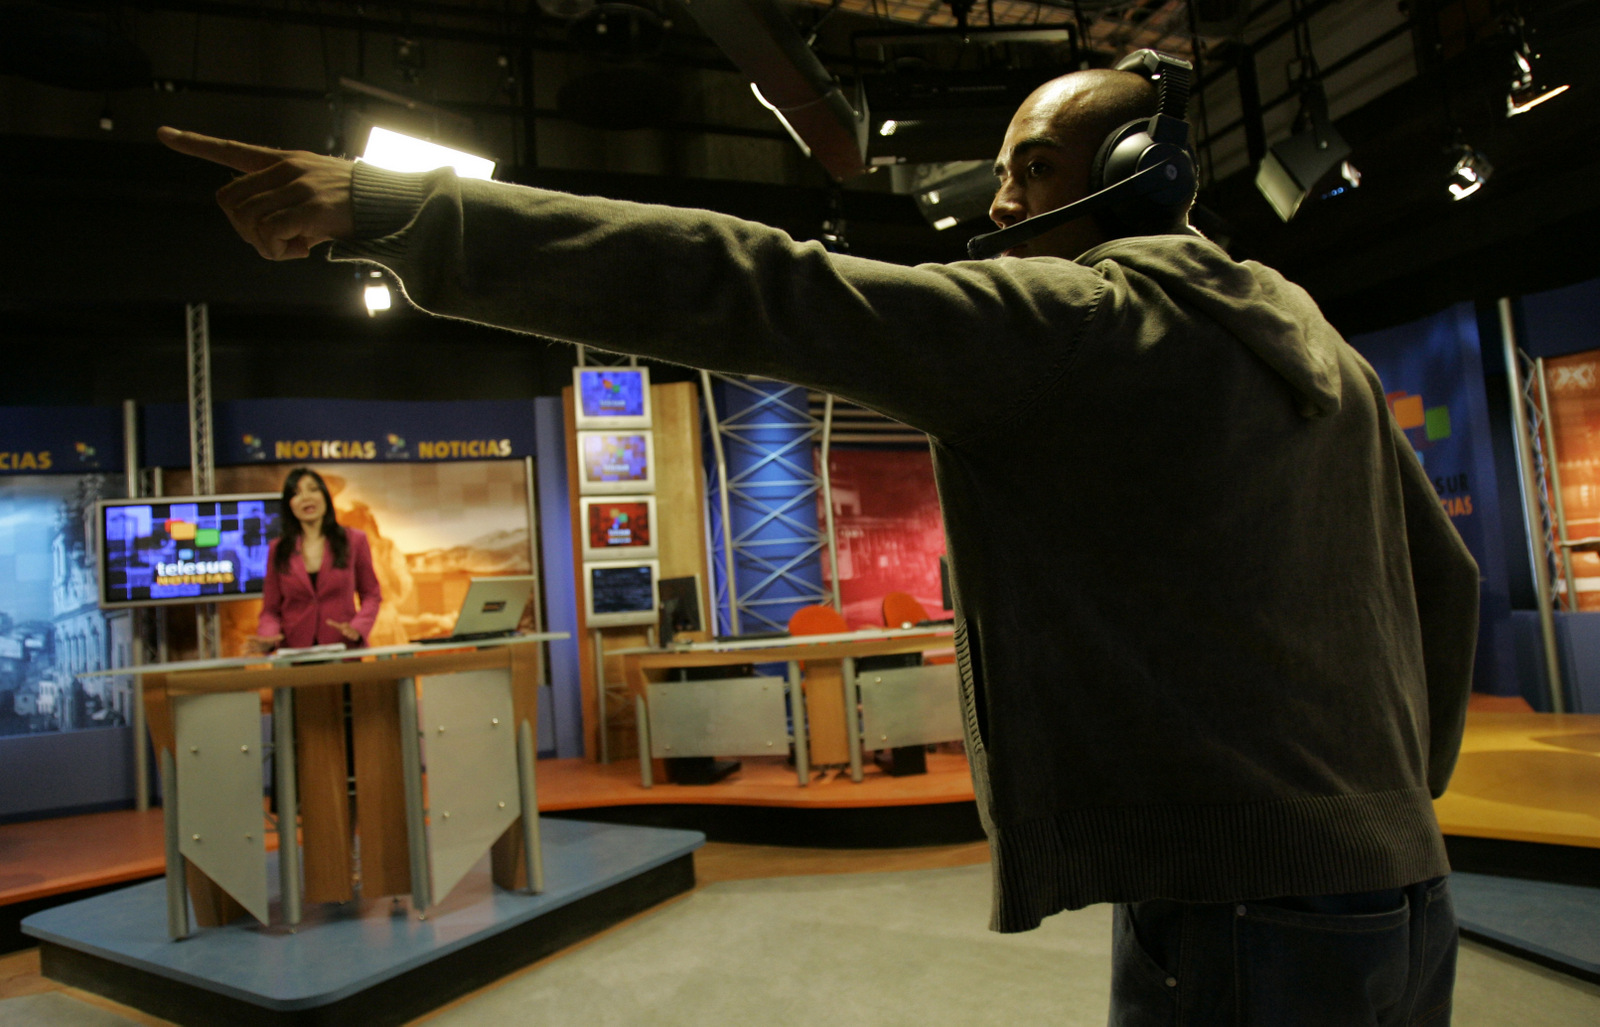 Telesur coordinator Luis Ramos directs news anchor Marcela Eredia at a rehearsal for a live news broadcast in Caracas, Venezuela, Monday, Oct. 31, 2005. (AP/Leslie Mazoch)